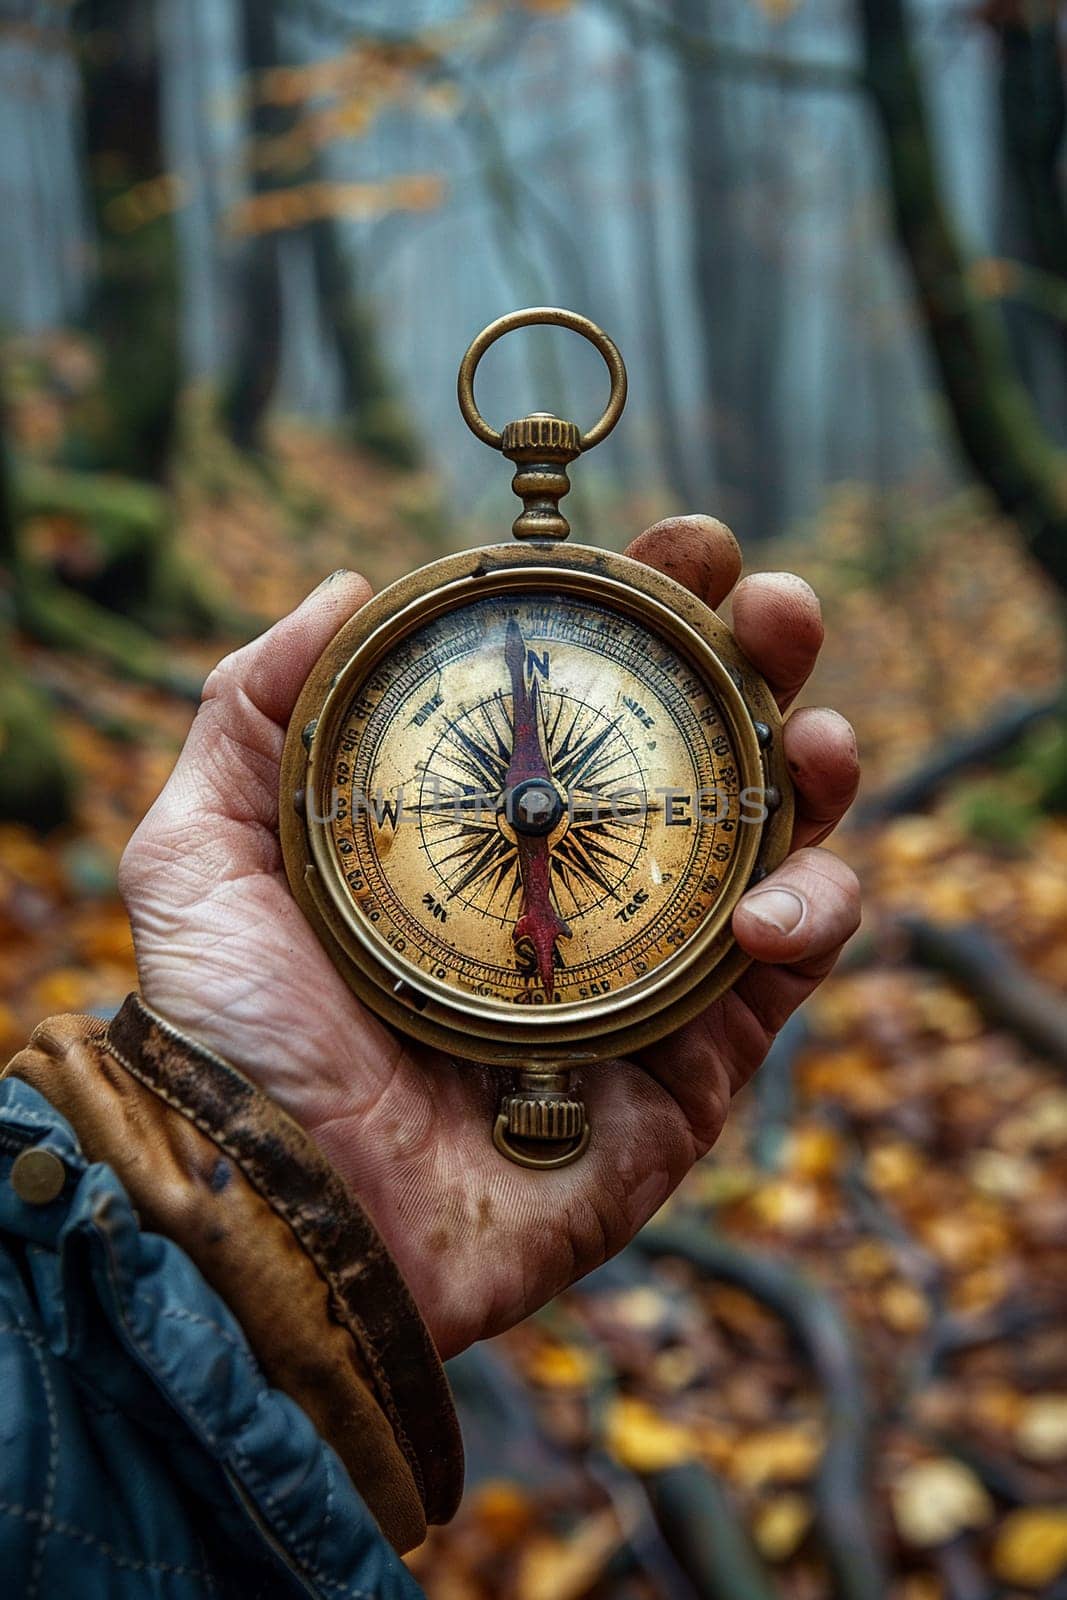 Hand holding a vintage compass, symbolizing direction and adventure in travel.